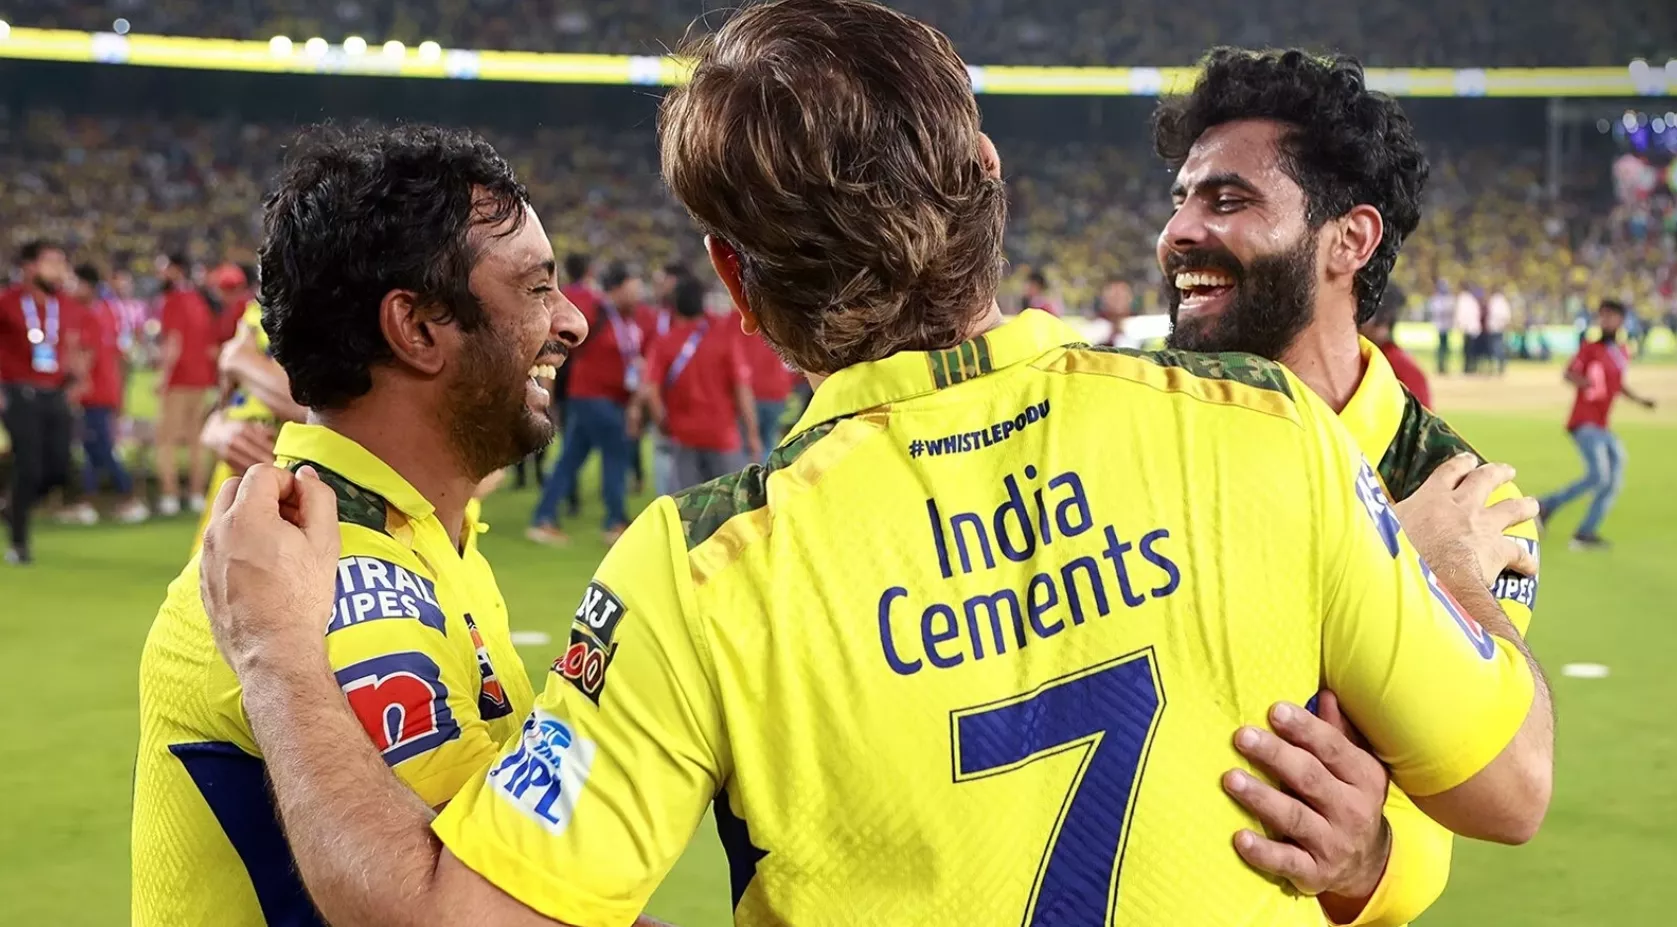 CSK bids farewell to Ambati Rayudu with an emotional send-off: A fairytale ending for a legendary player